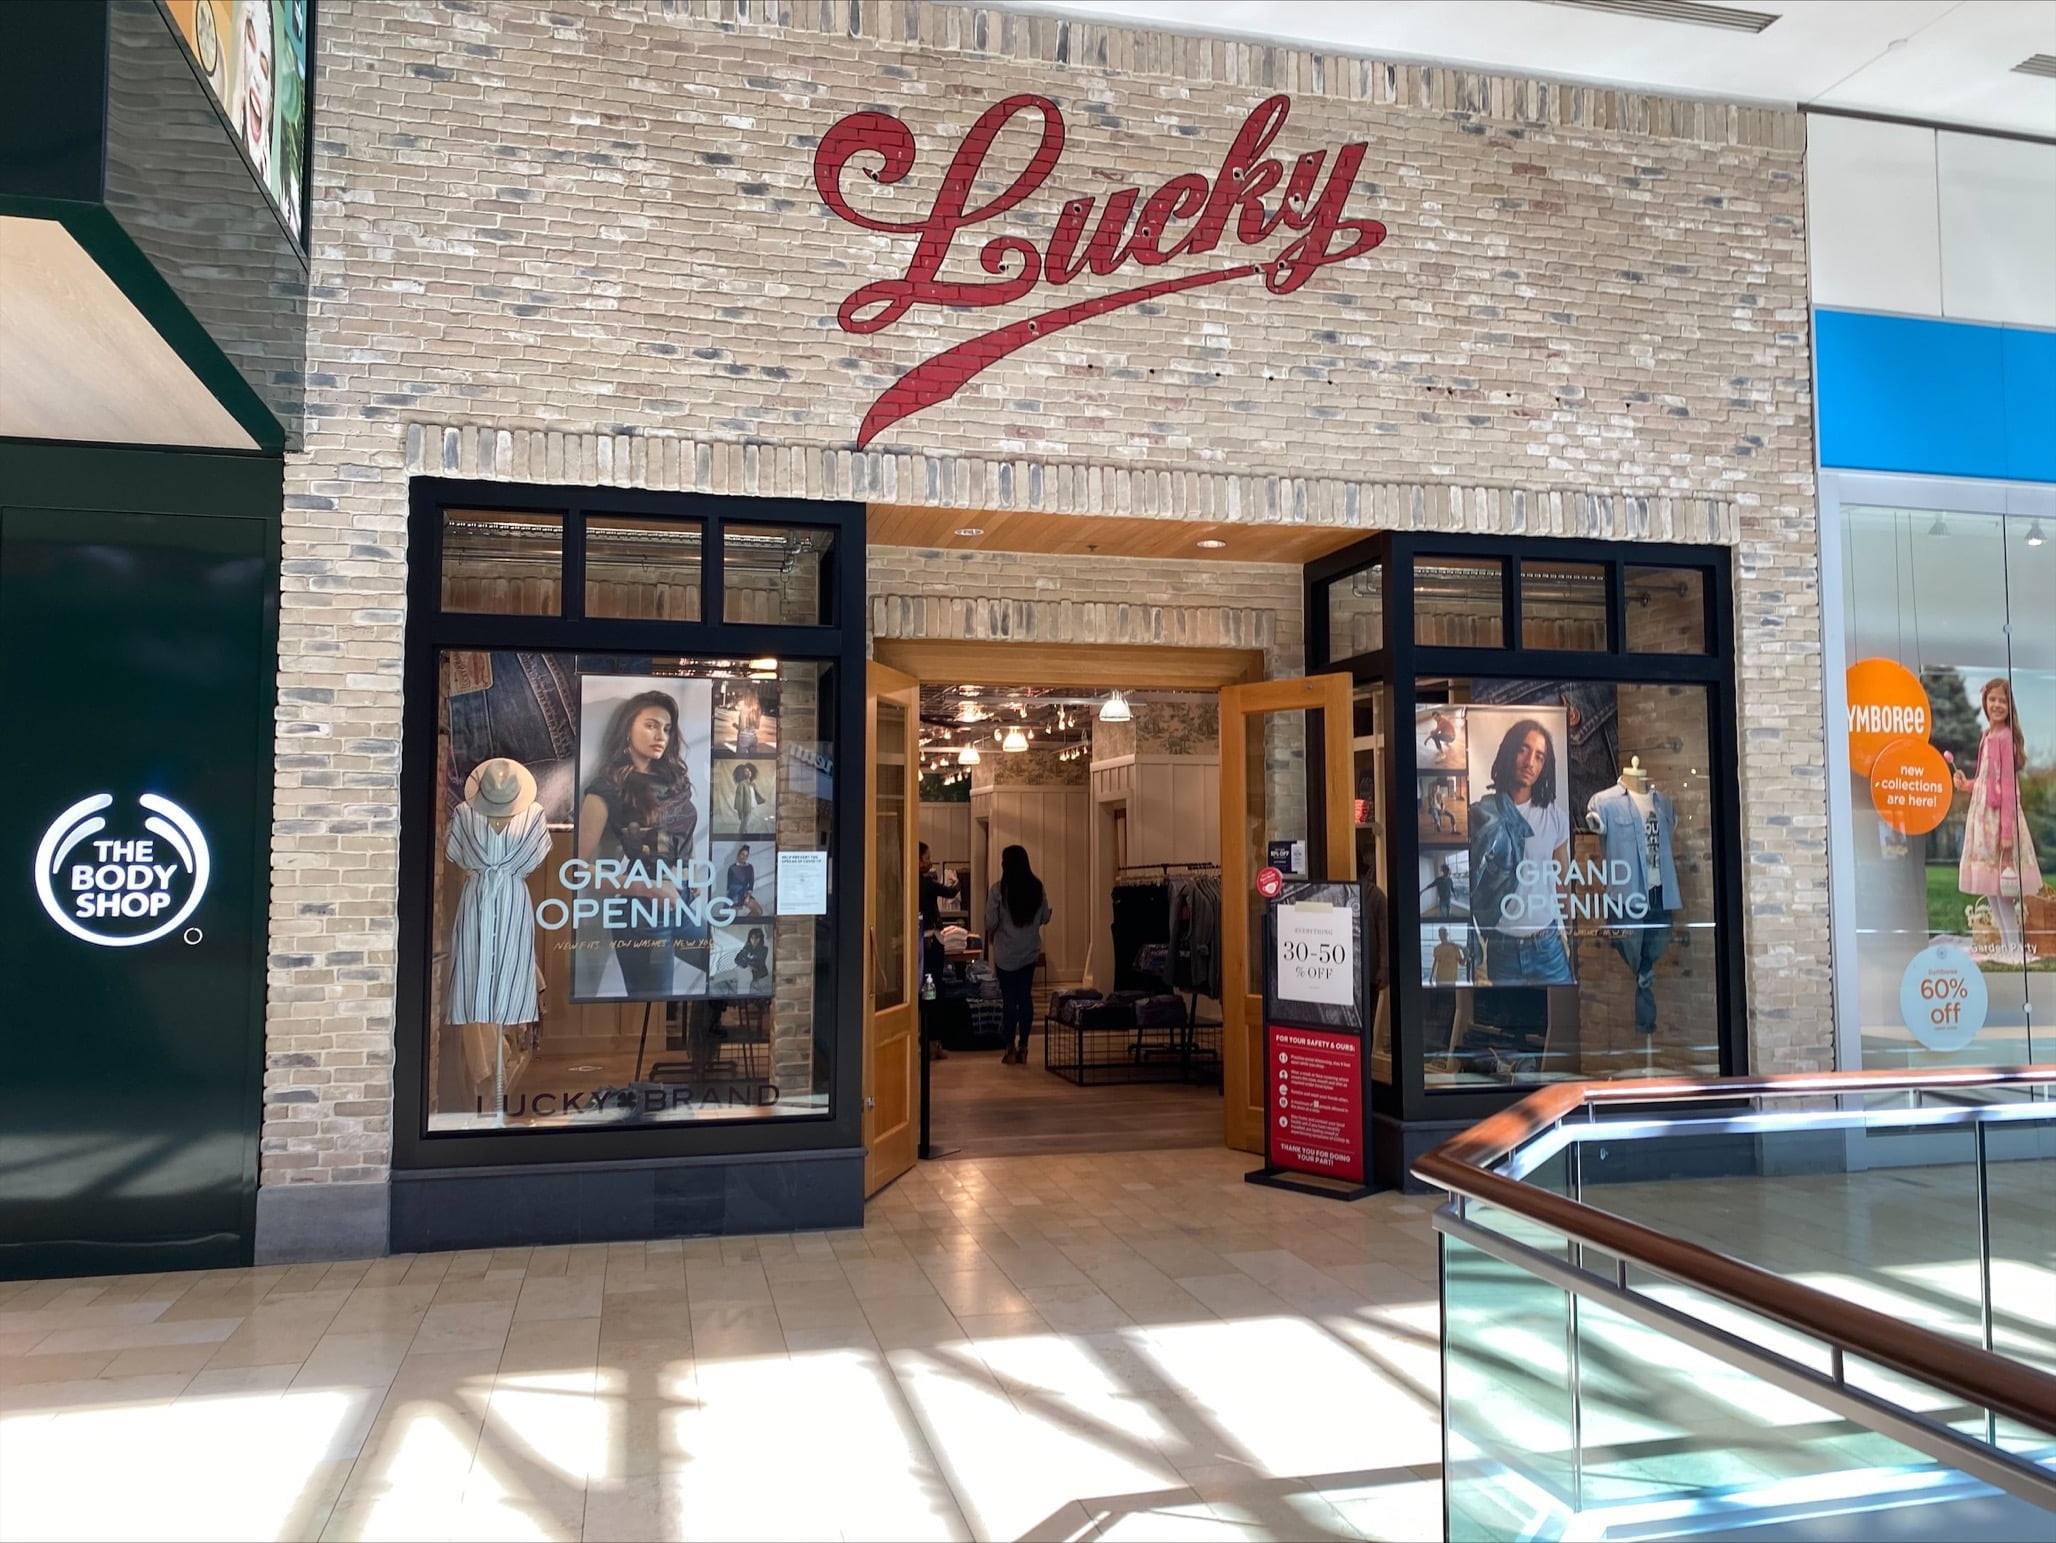 Lucky Brand Debuts One-of-a-Kind Store Experience